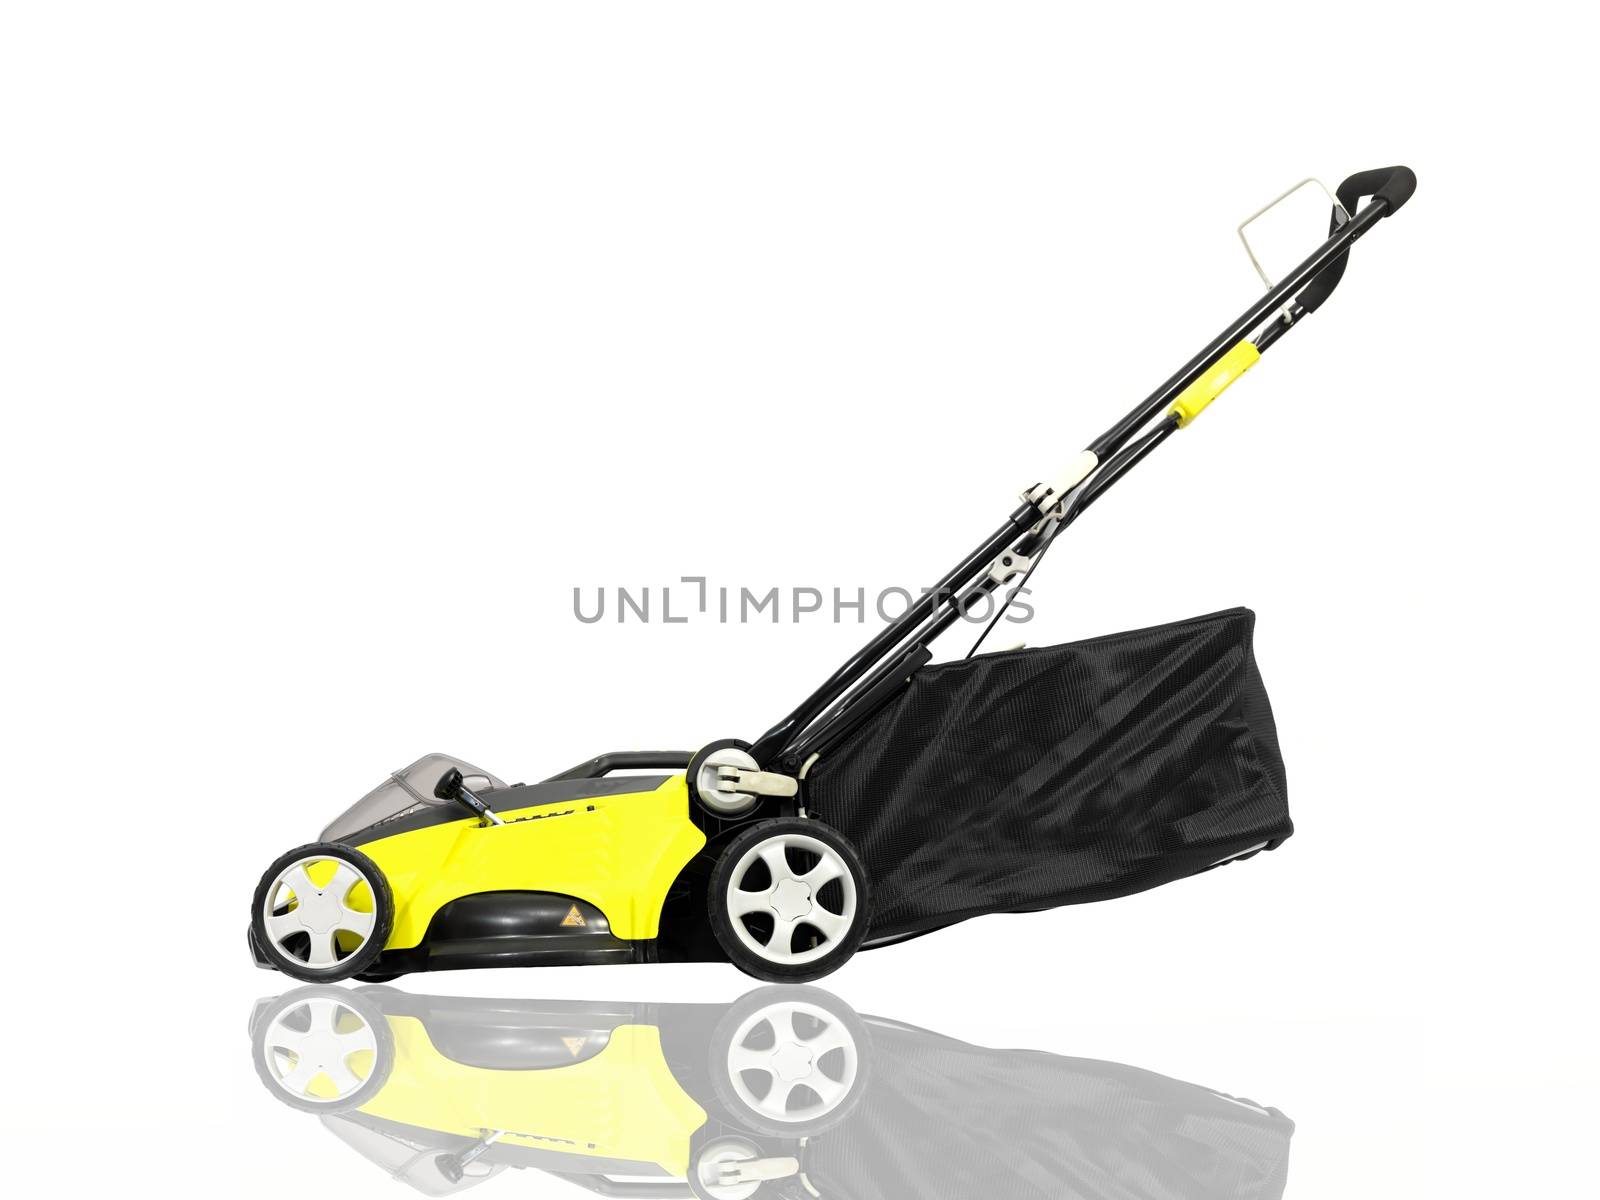 Lawn Mower by Kitch